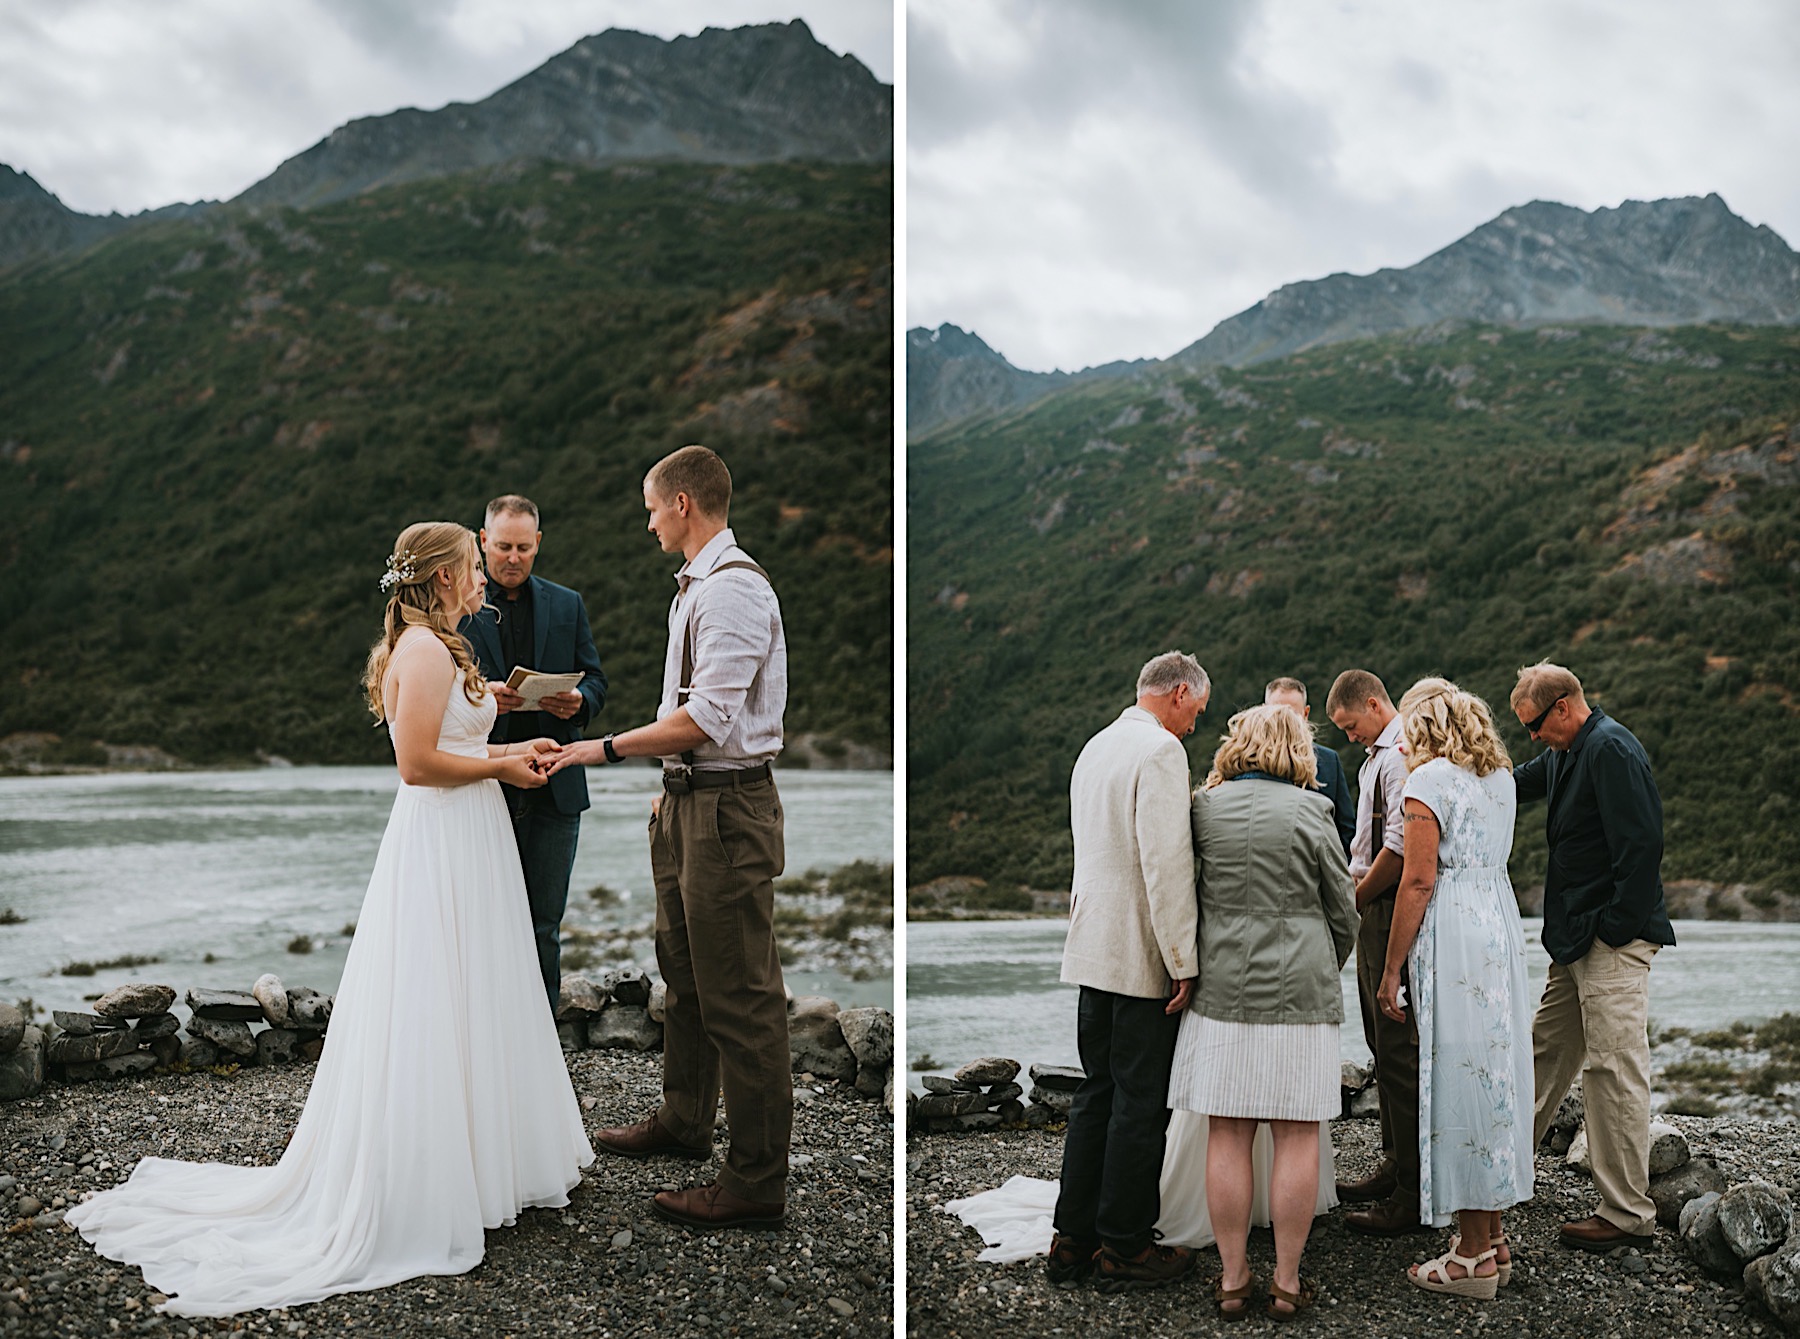 Side by side image of couple exchanging rings and then their family praying over them